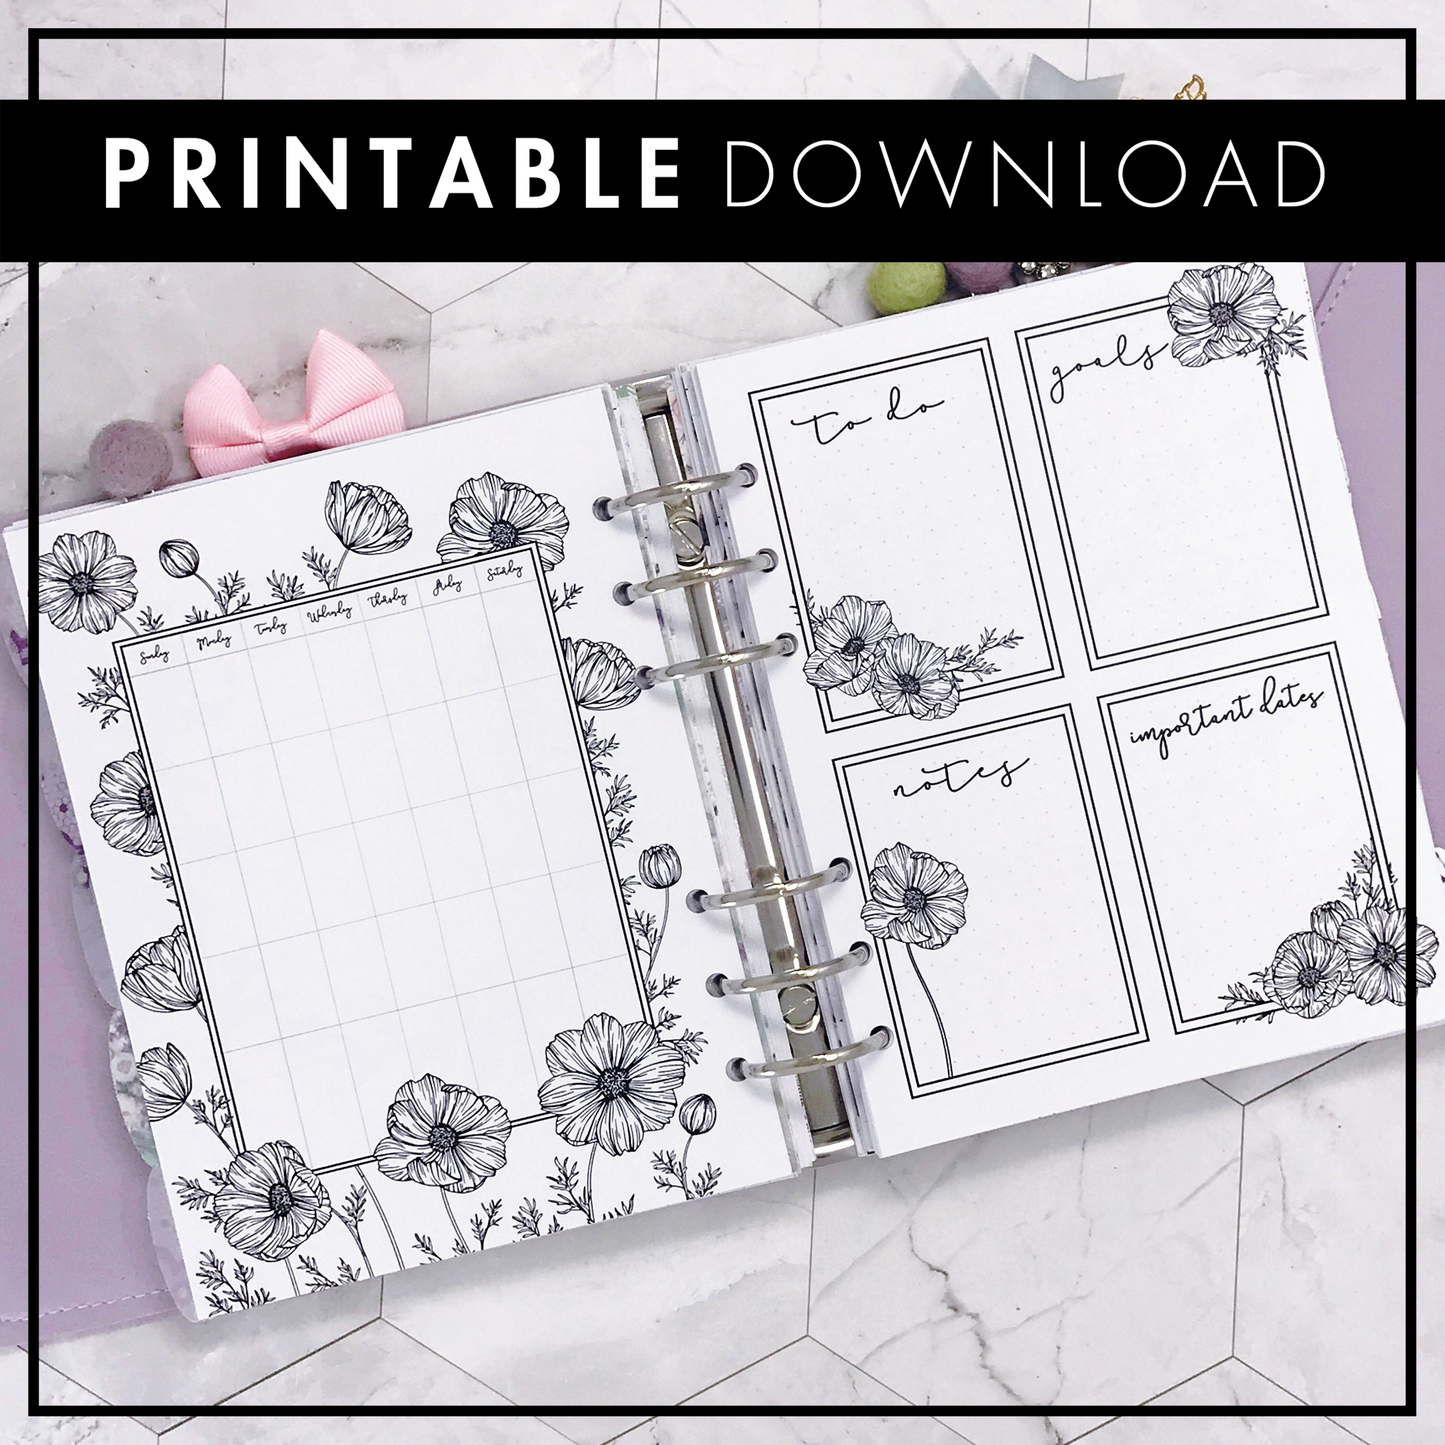 Themed Monthly All Inclusive - Botanical Series | Printable